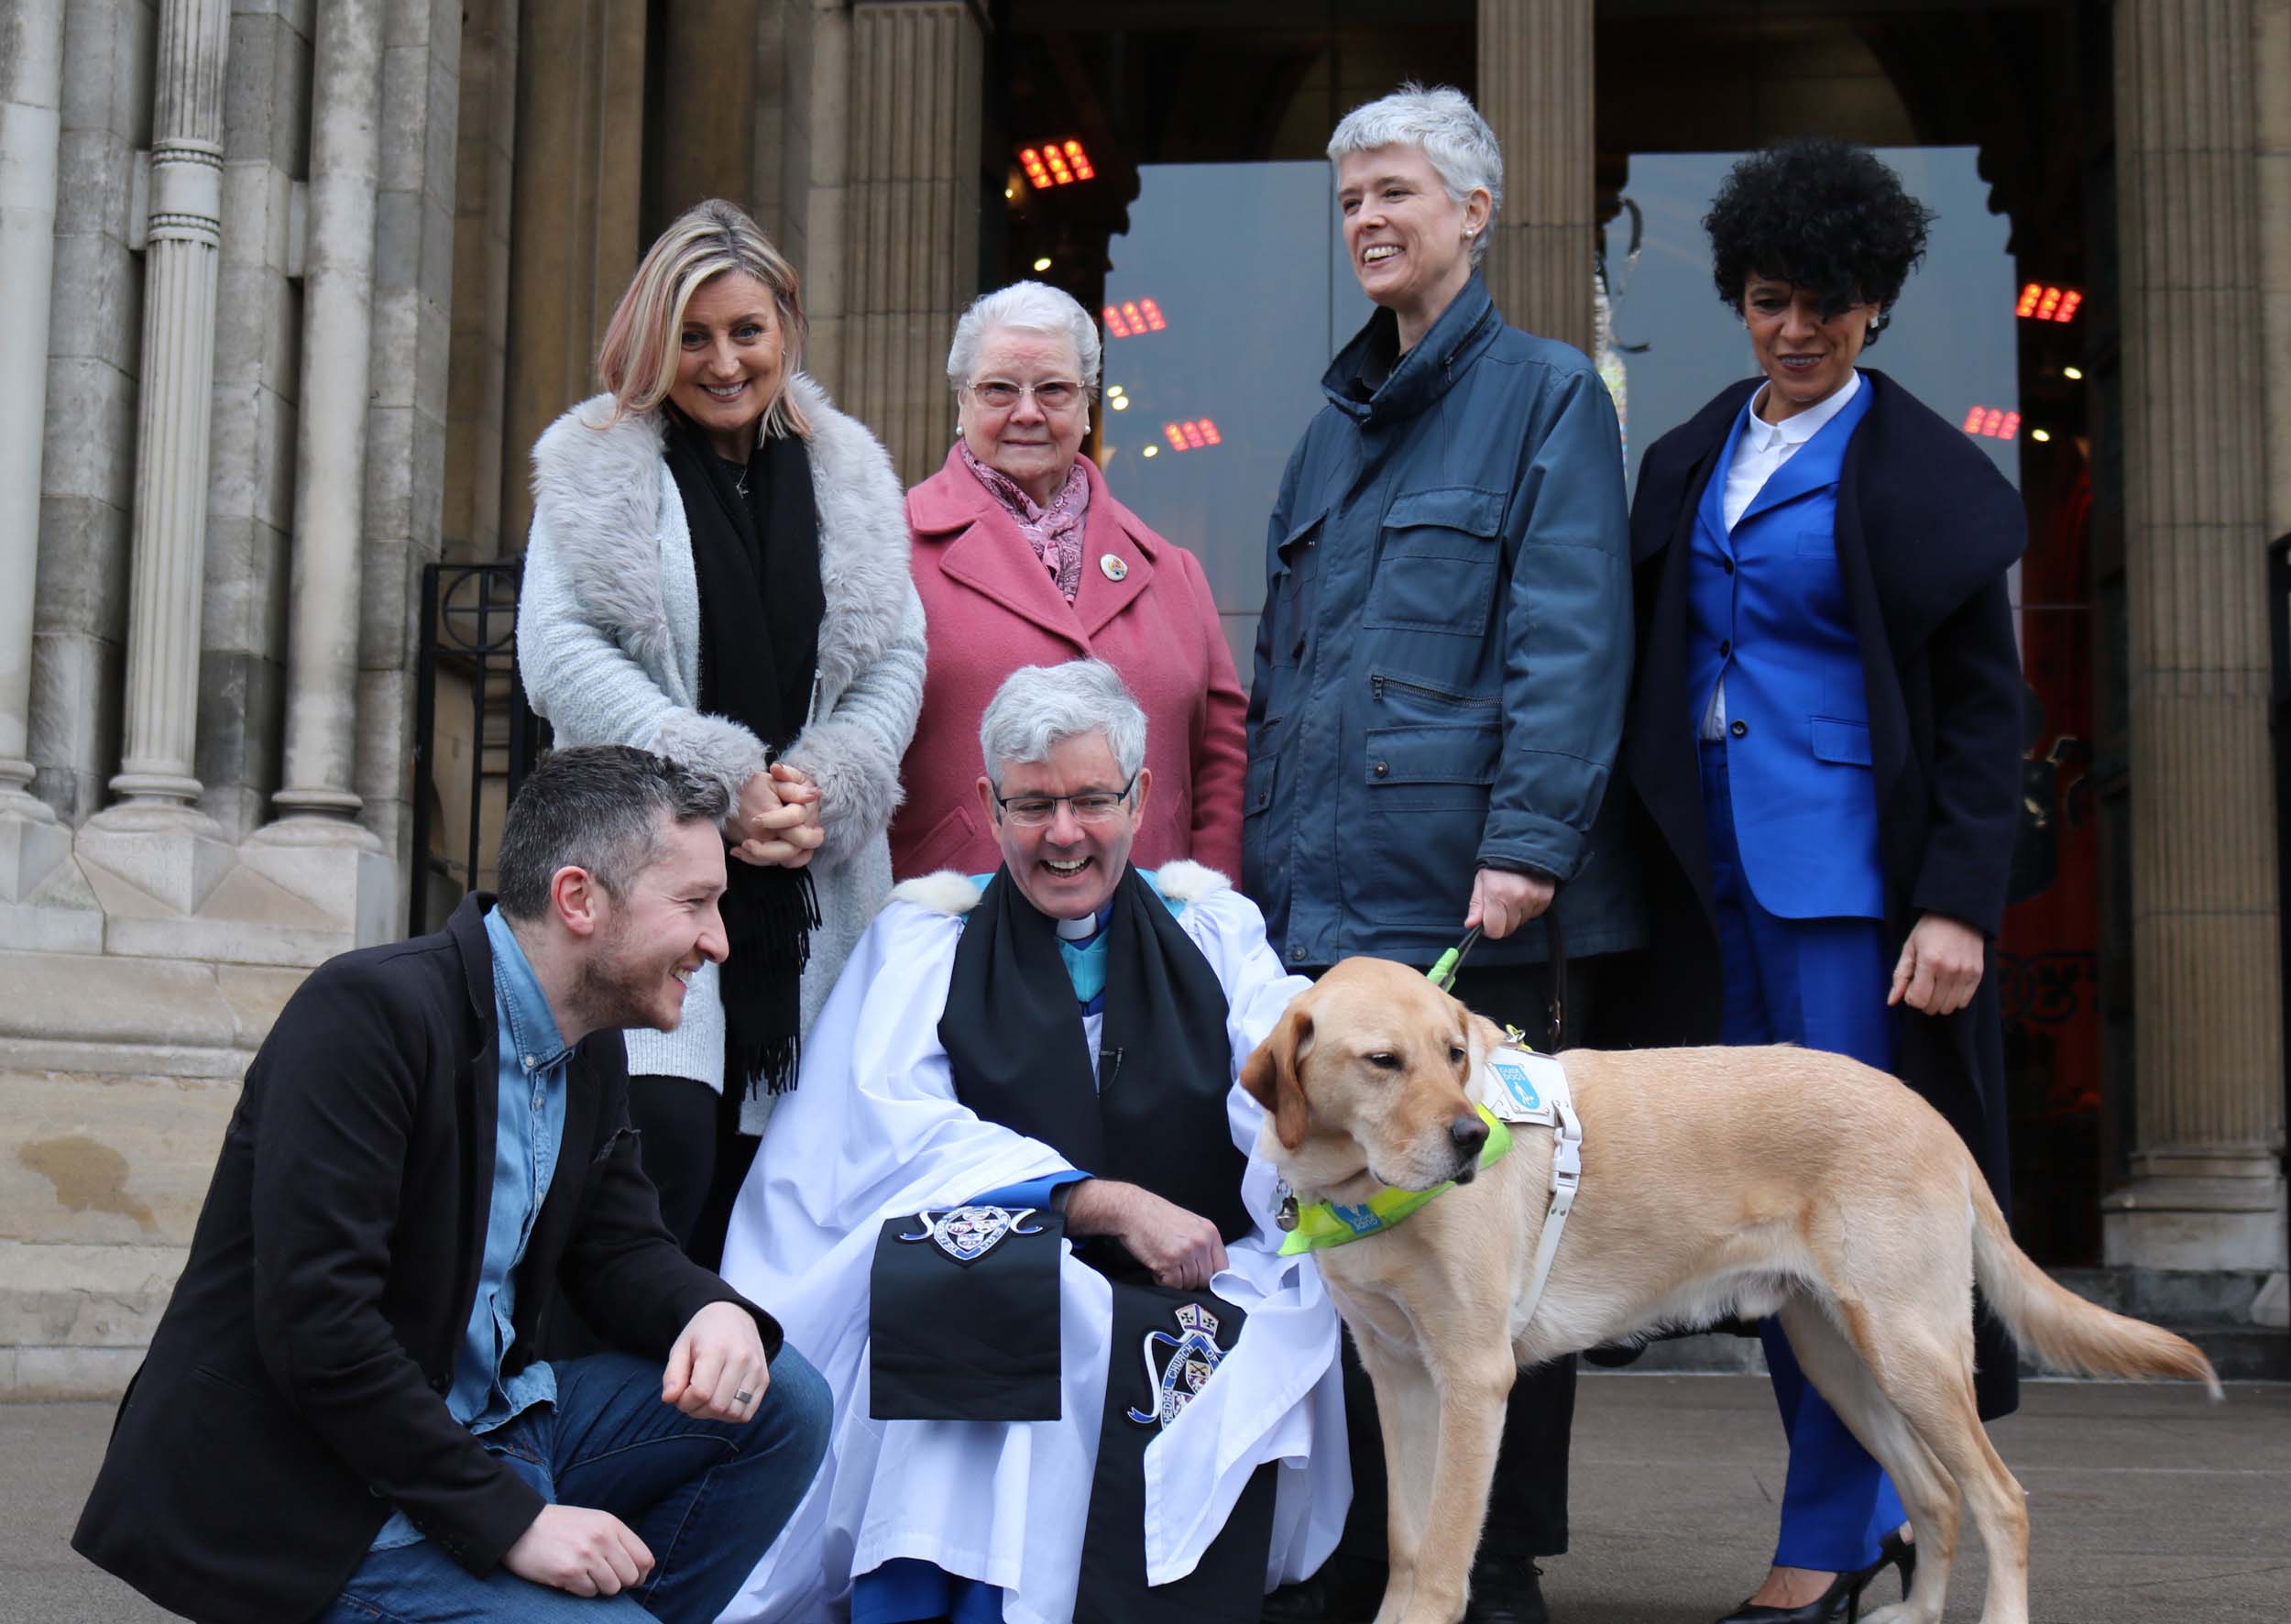 At the annual Good Samaritans Service at Belfast Cathedral on February 3, are, back from left: Lynda Bryans, special guest; Kathleen McGarrity, Colmcille Senior Citizens Club, Omagh; Diane Marks, Guide Dogs NI with Morris; Carolyn Stewart, Youth Lyric. Front: Peter Kernoghan, No More Traffik and Dean Stephen Forde.  Two hundred and twenty charities received grants totalling £168,000 raised at the Christmas 2018 Black Santa Sit-out.